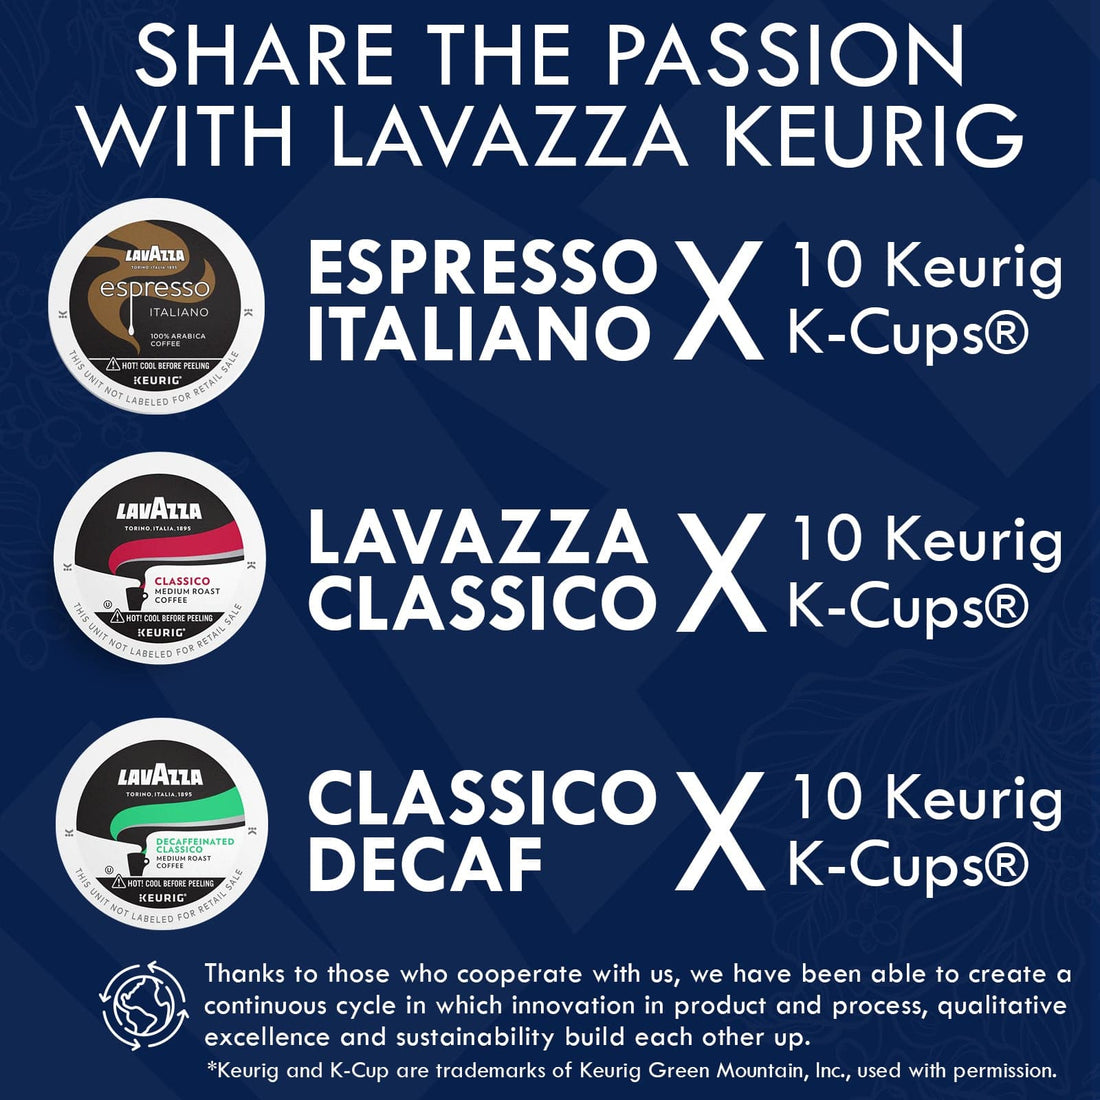 Lavazza K - Cups Variety Mix of 30 Coffee Pods - Espresso, Classico, Decaf, 10 Capsules Each